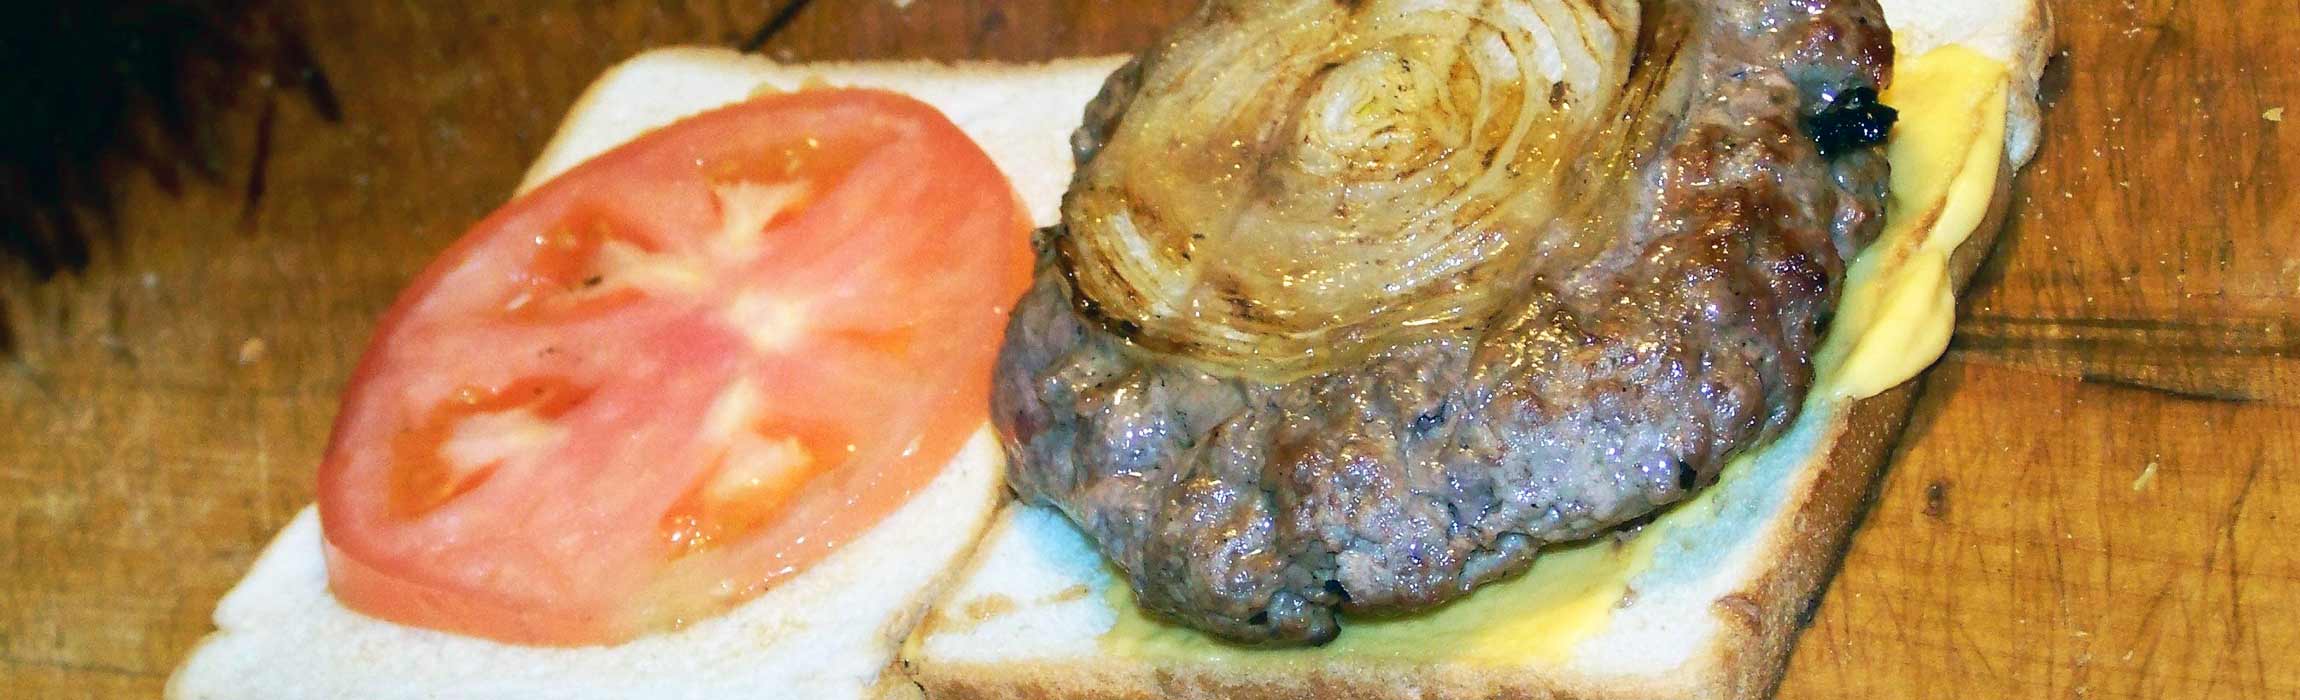 Burger patty with onion, tomato, and cheese from Louis' Lunch restaurant in New Haven, CT